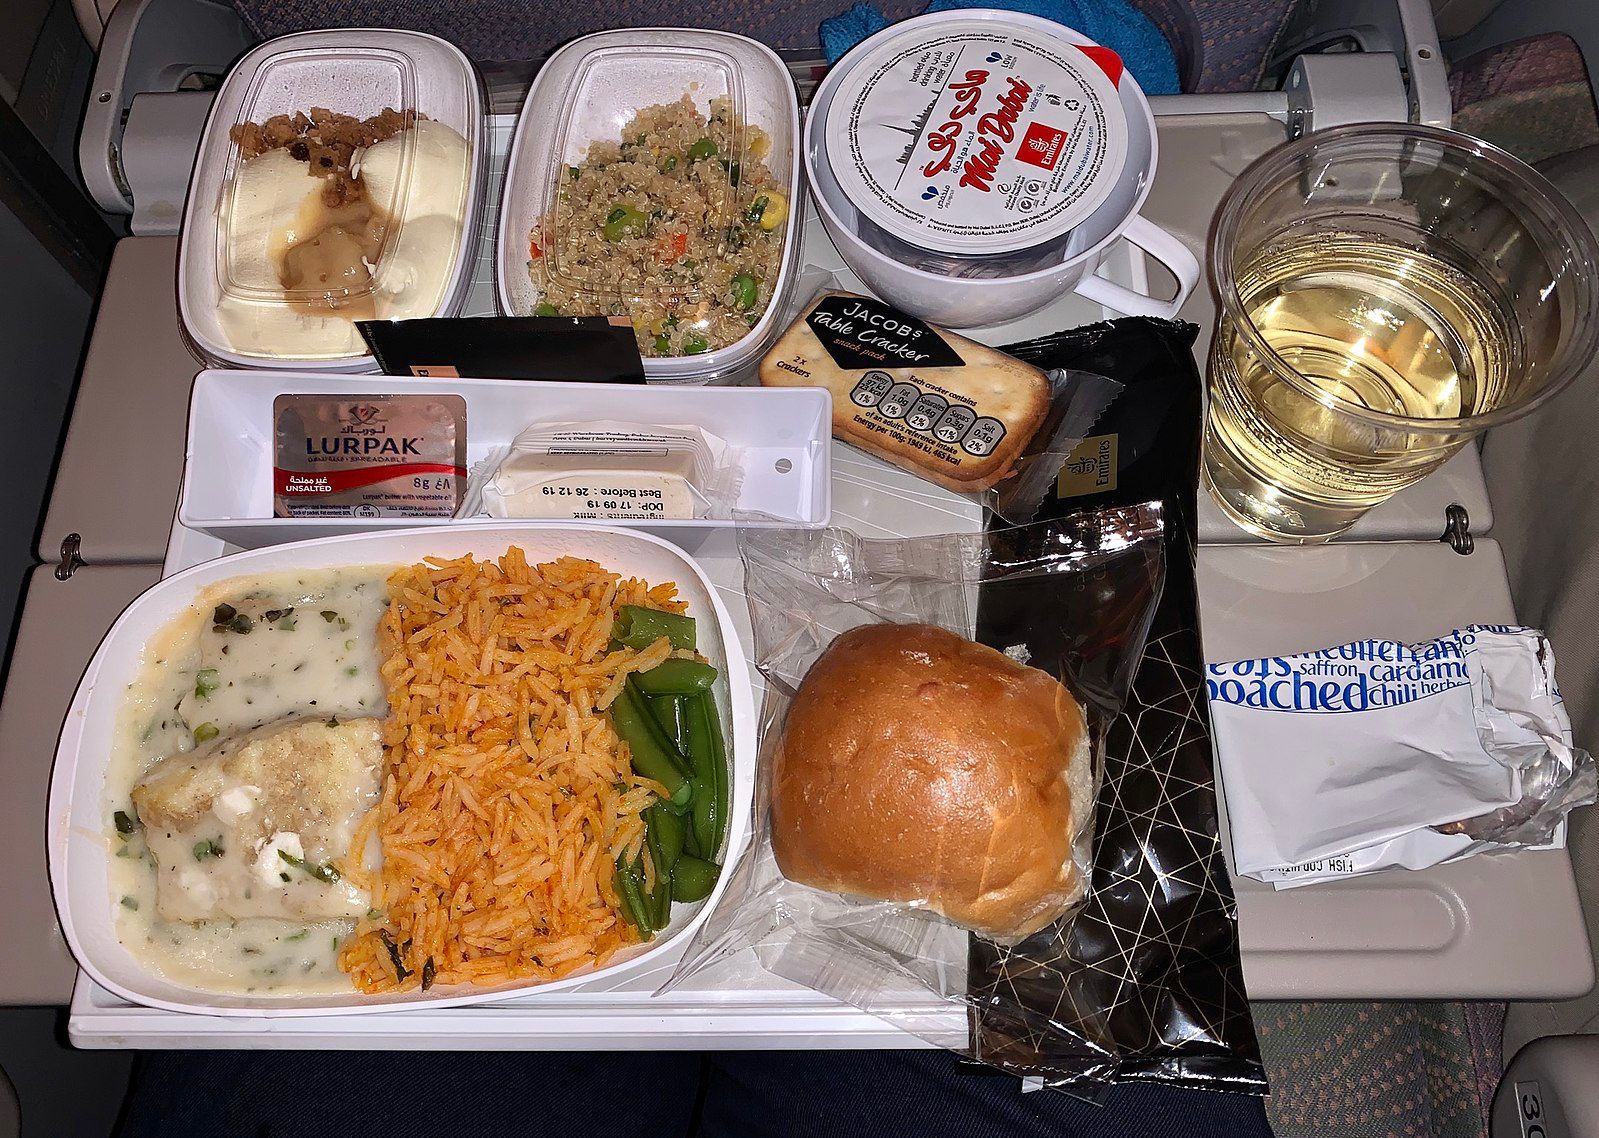 An fEmirates economy class meal.